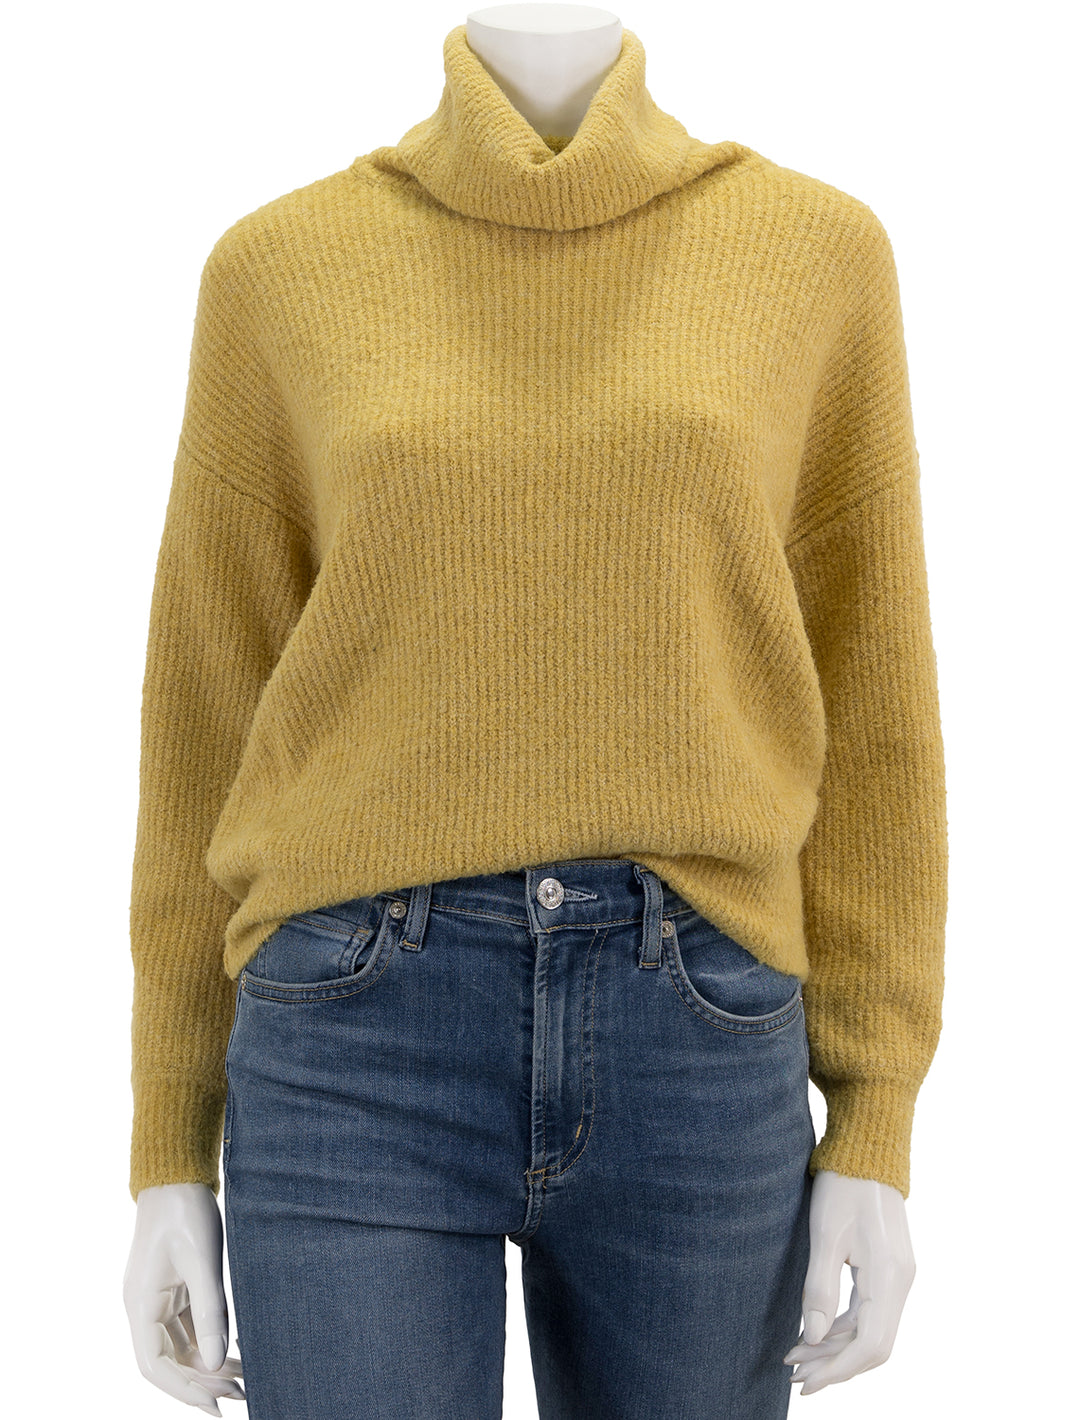 Front view of Lilla P.'s oversized ribbed turtleneck in gold dust.